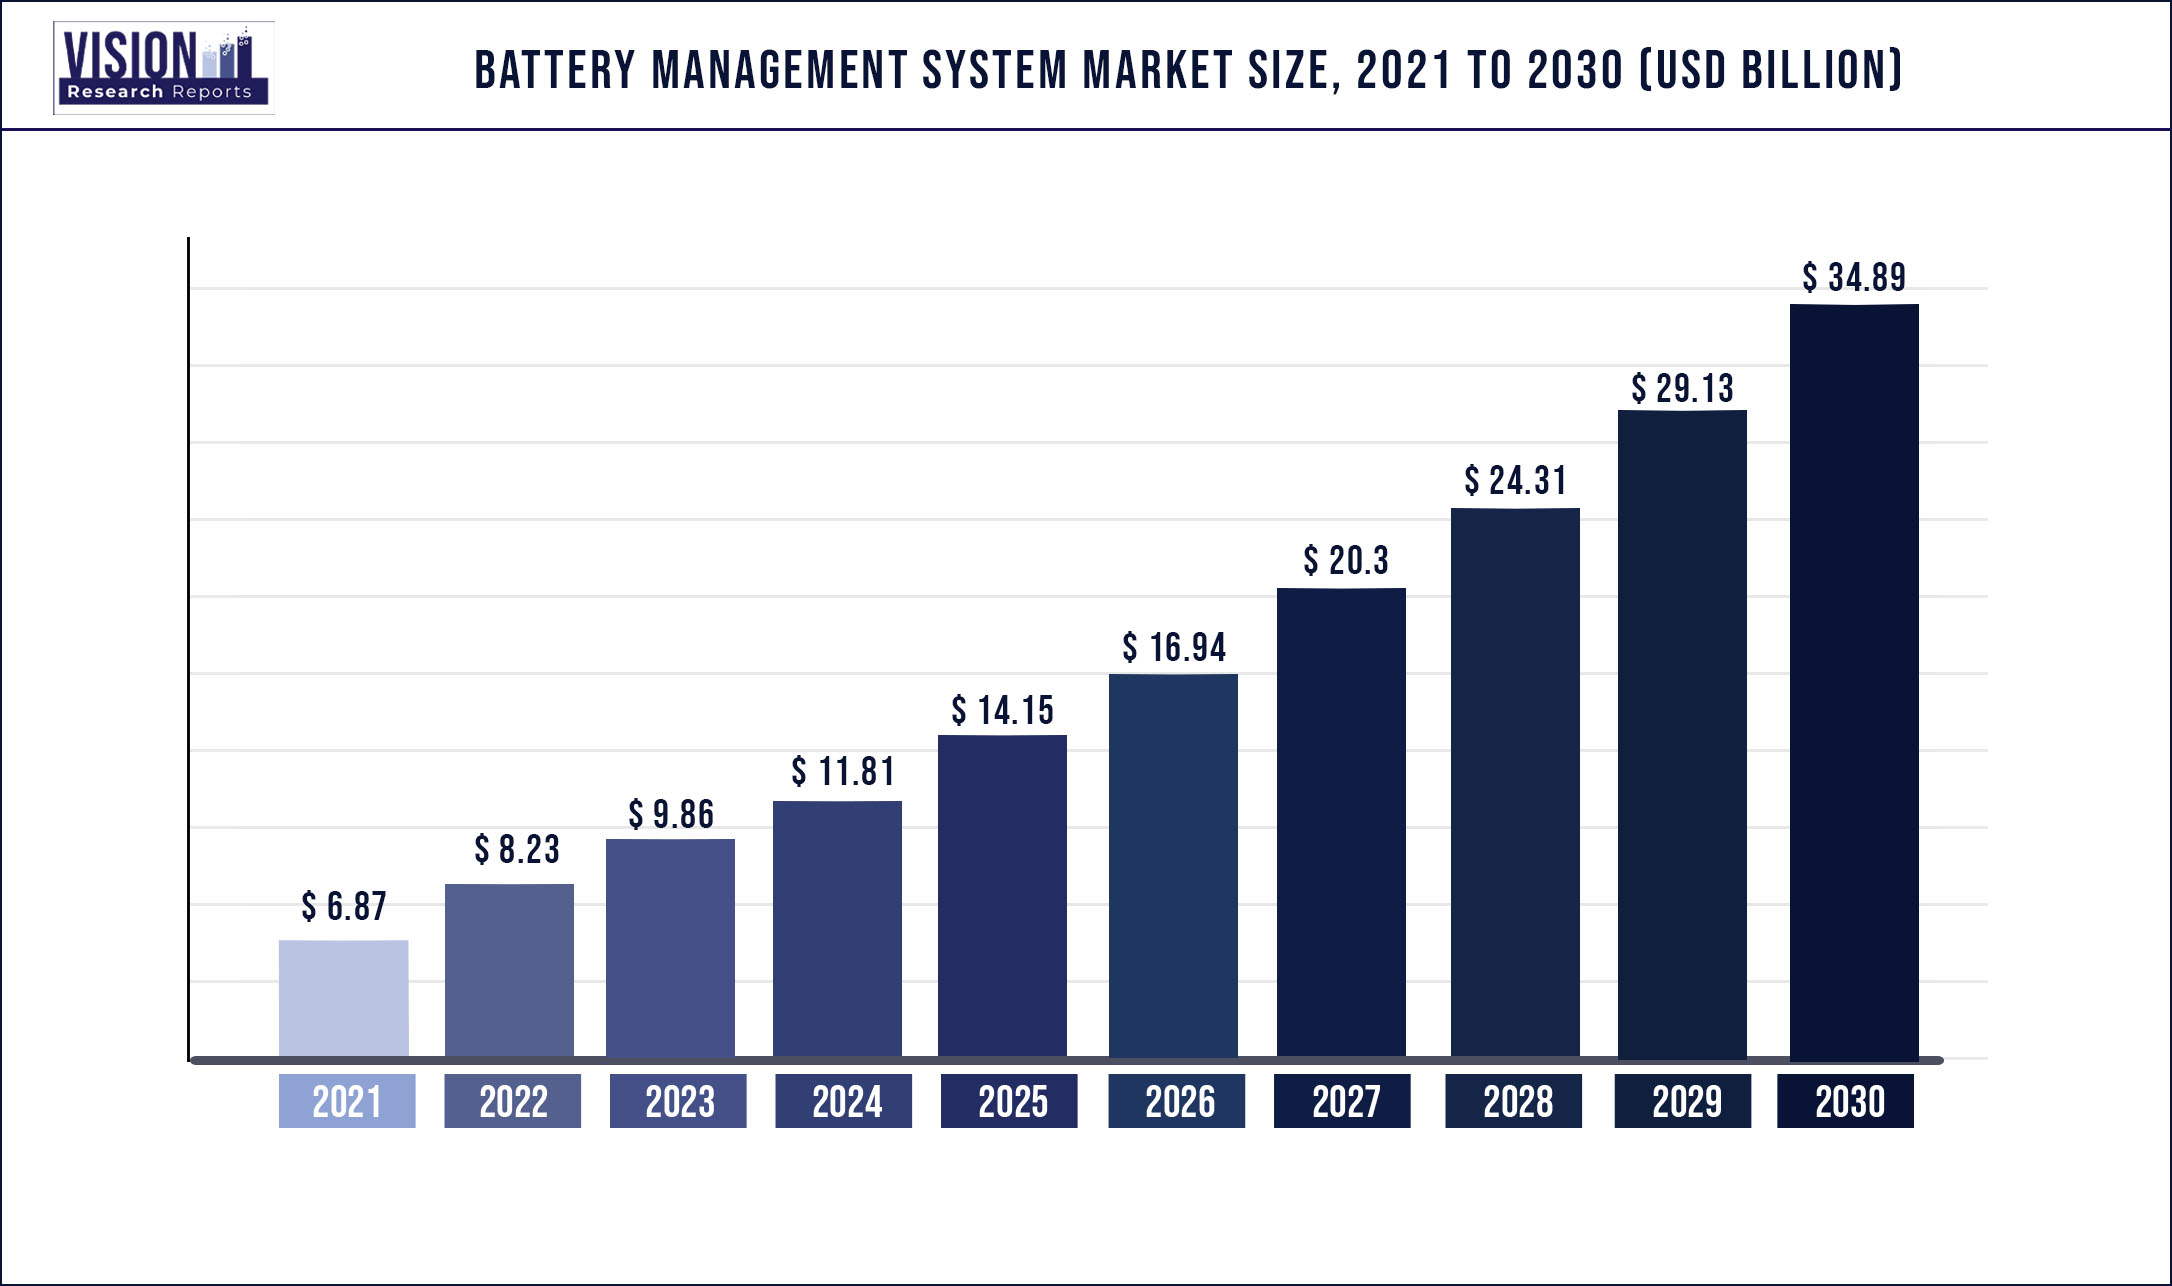 Battery Management System Market Size 2021 to 2030